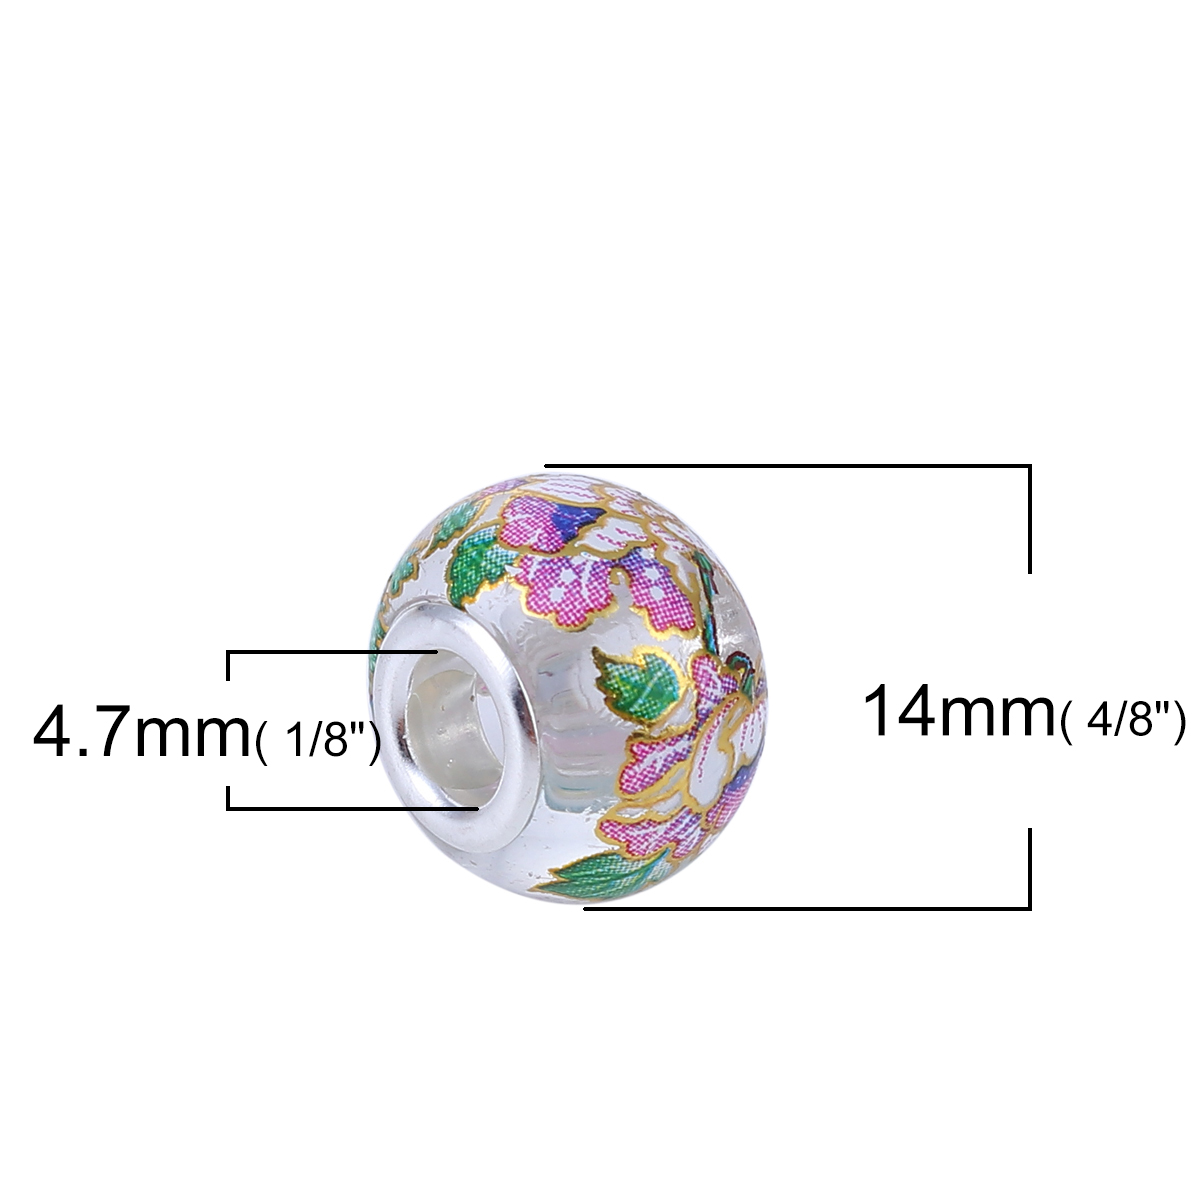 Picture of Glass Japan Painting Vintage Japanese Tensha European Style Large Hole Charm Beads Round Silver Plated Morning Glory Flower Transparent Clear About 14mm( 4/8") Dia, Hole: Approx 4.7mm, 5 PCs